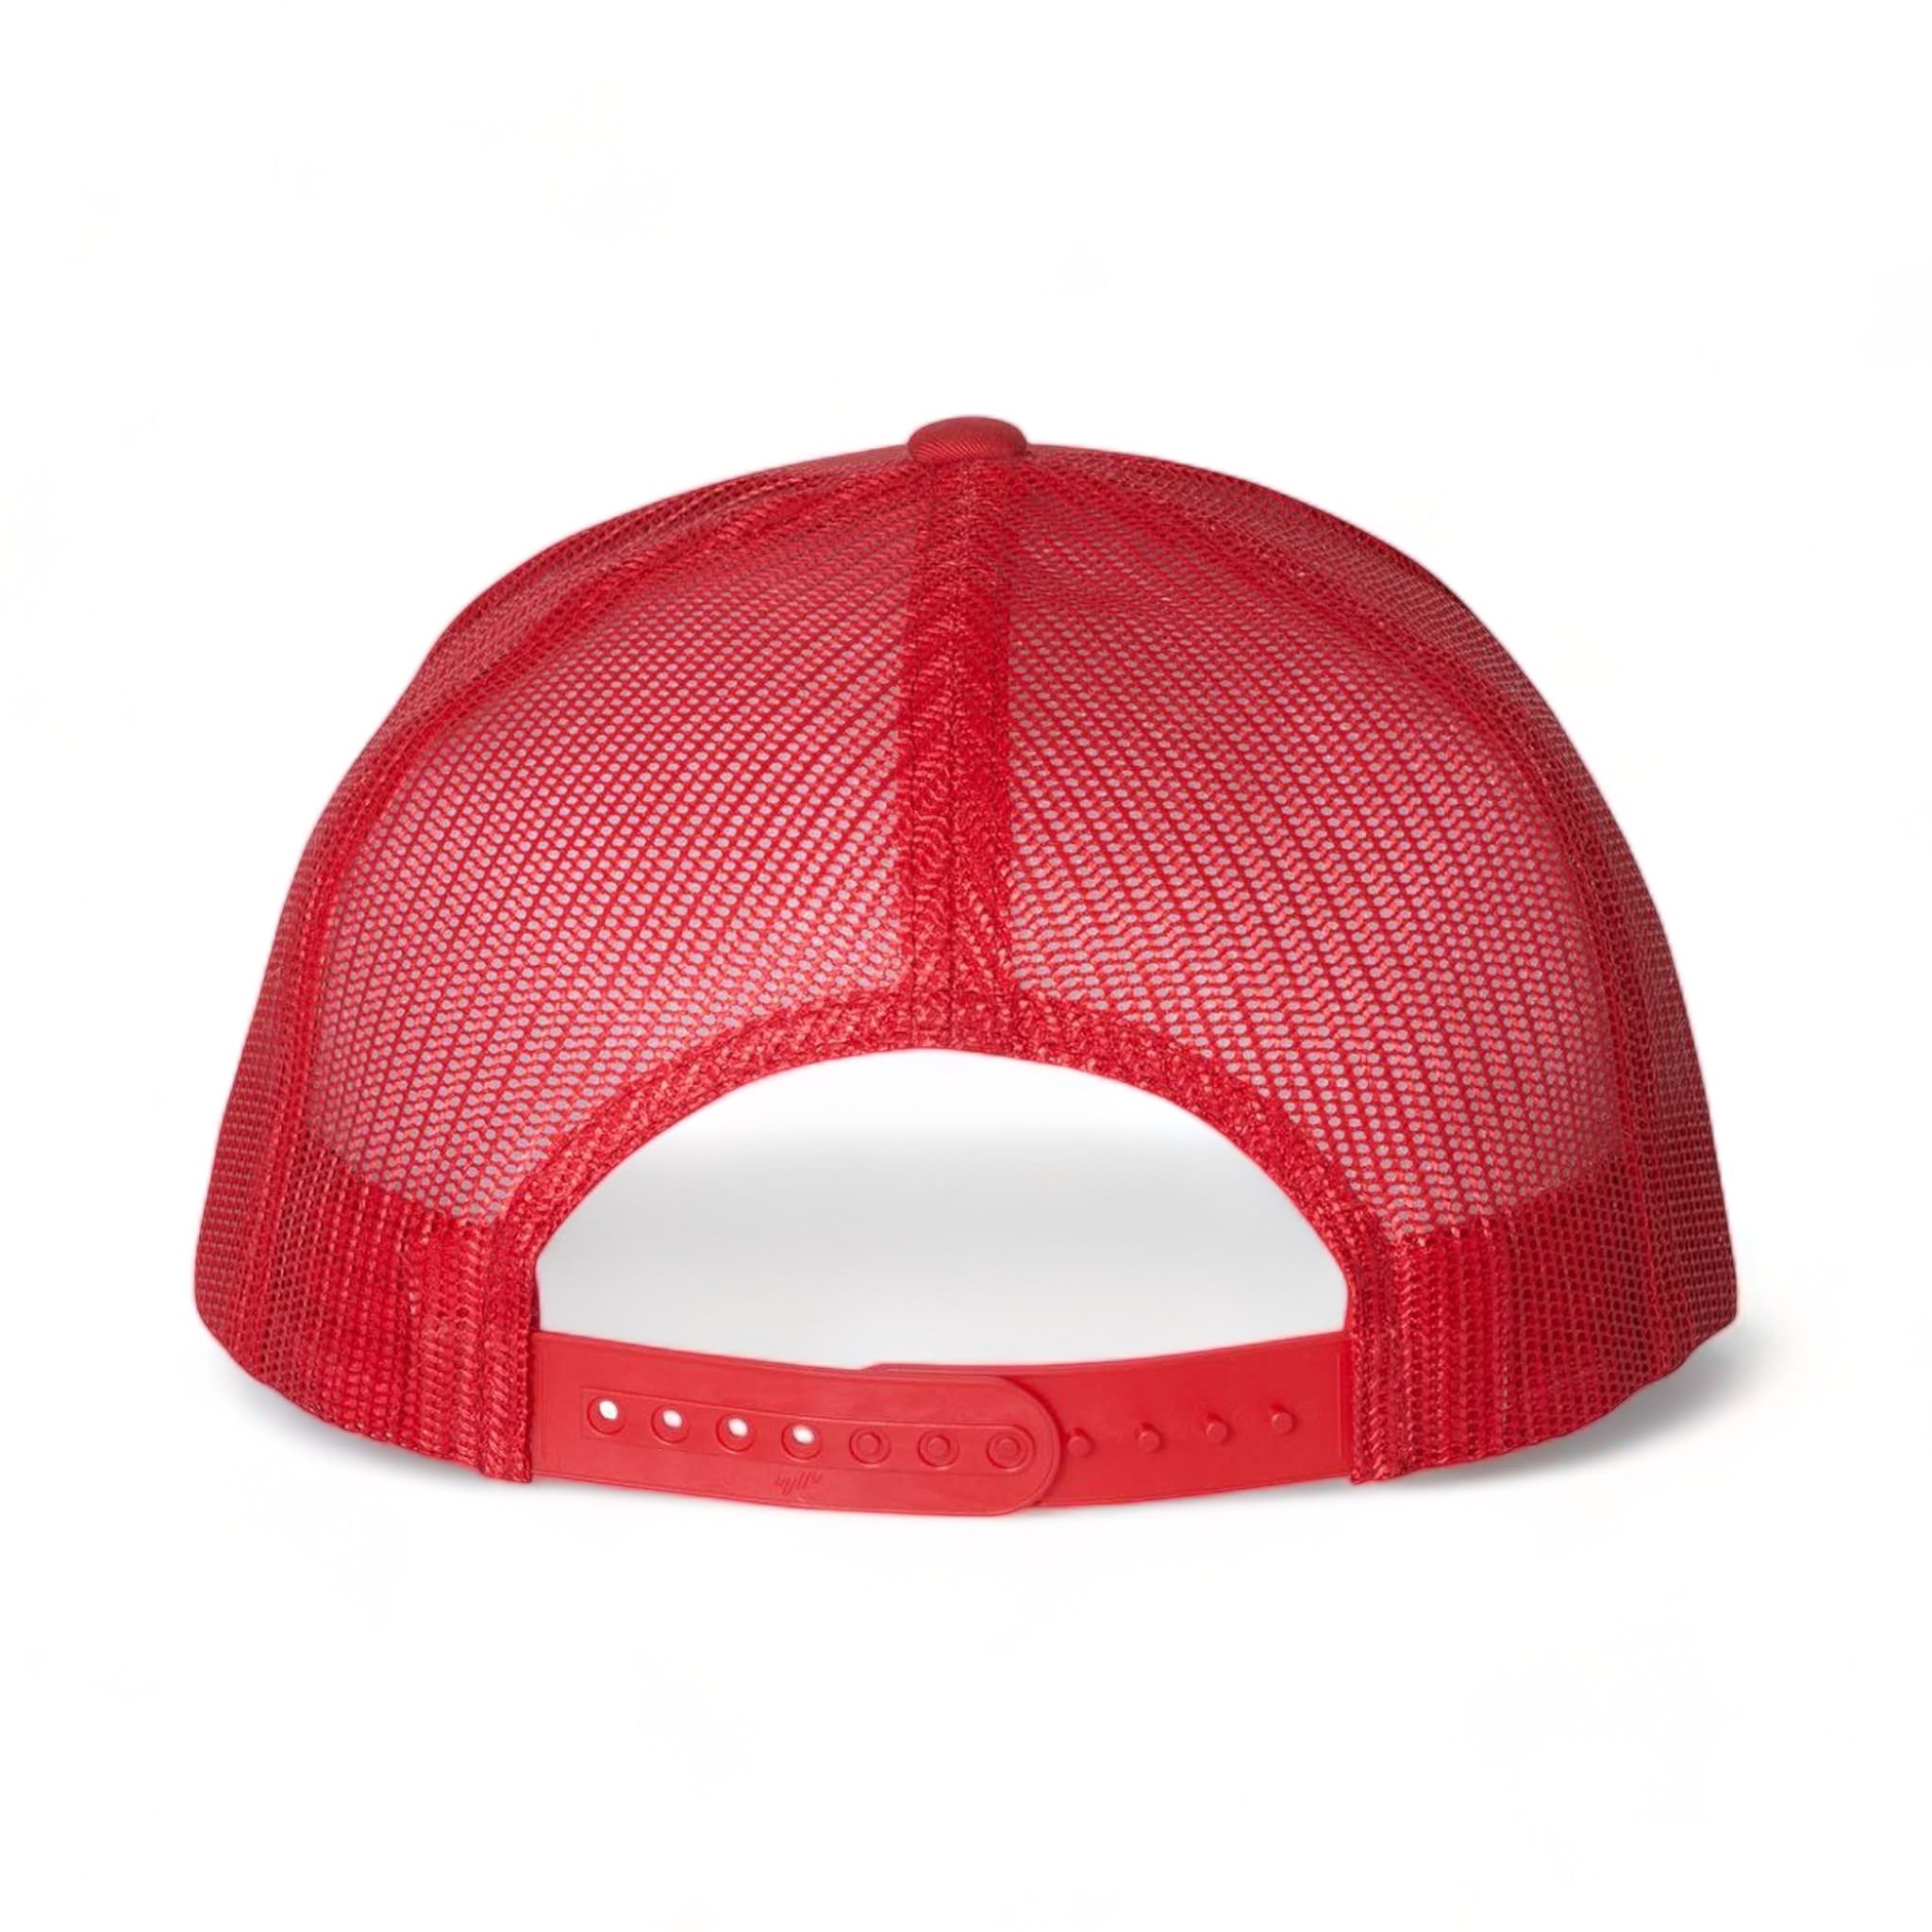 Back view of YP Classics 6006 custom hat in red